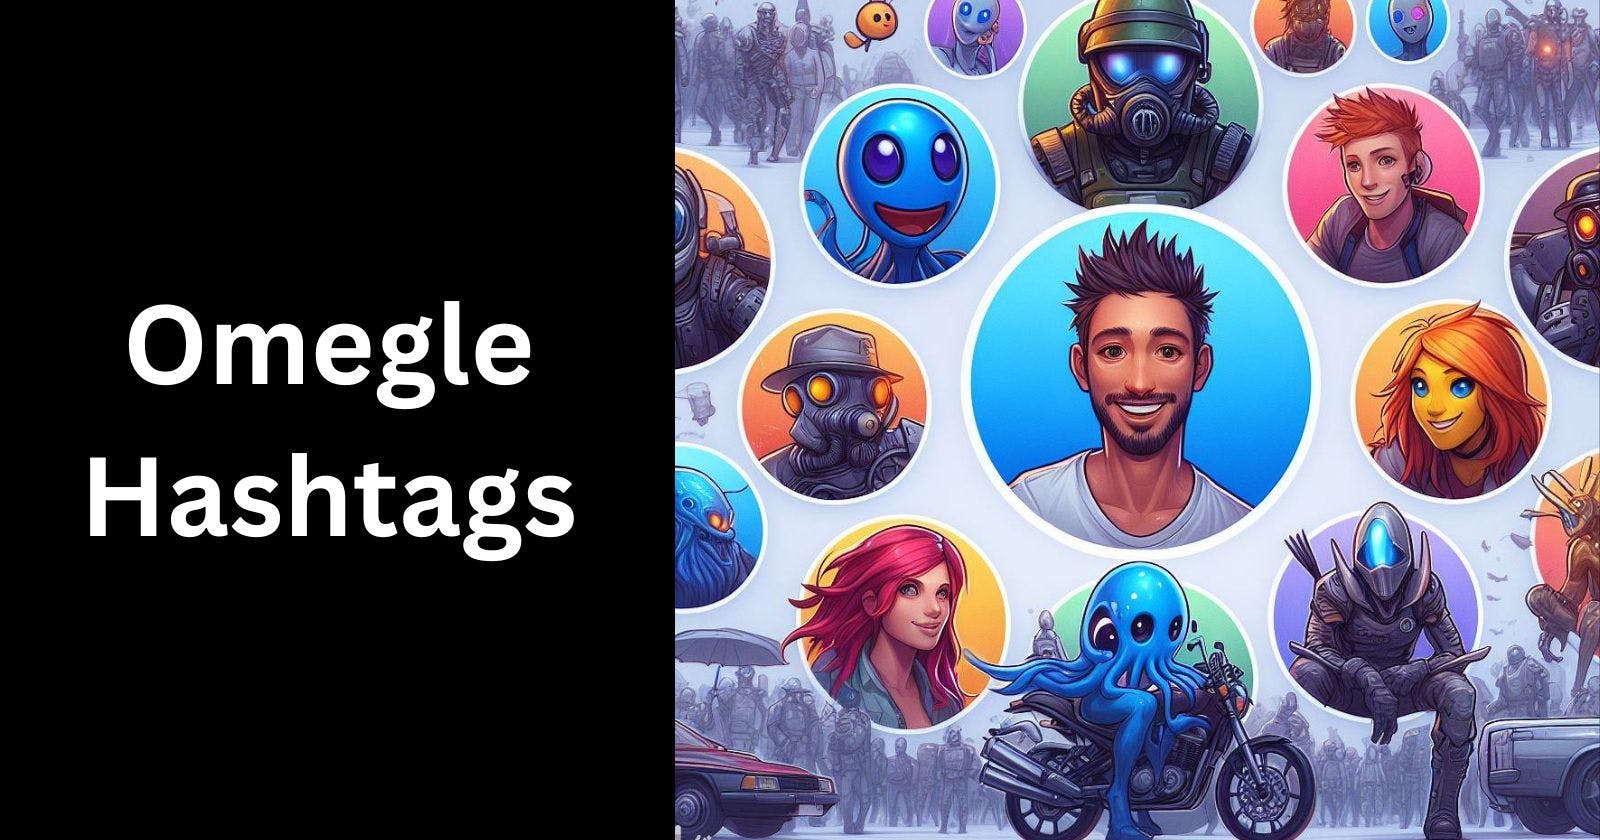 The Top Omegle Hashtags to Find Awesome Chat Partners